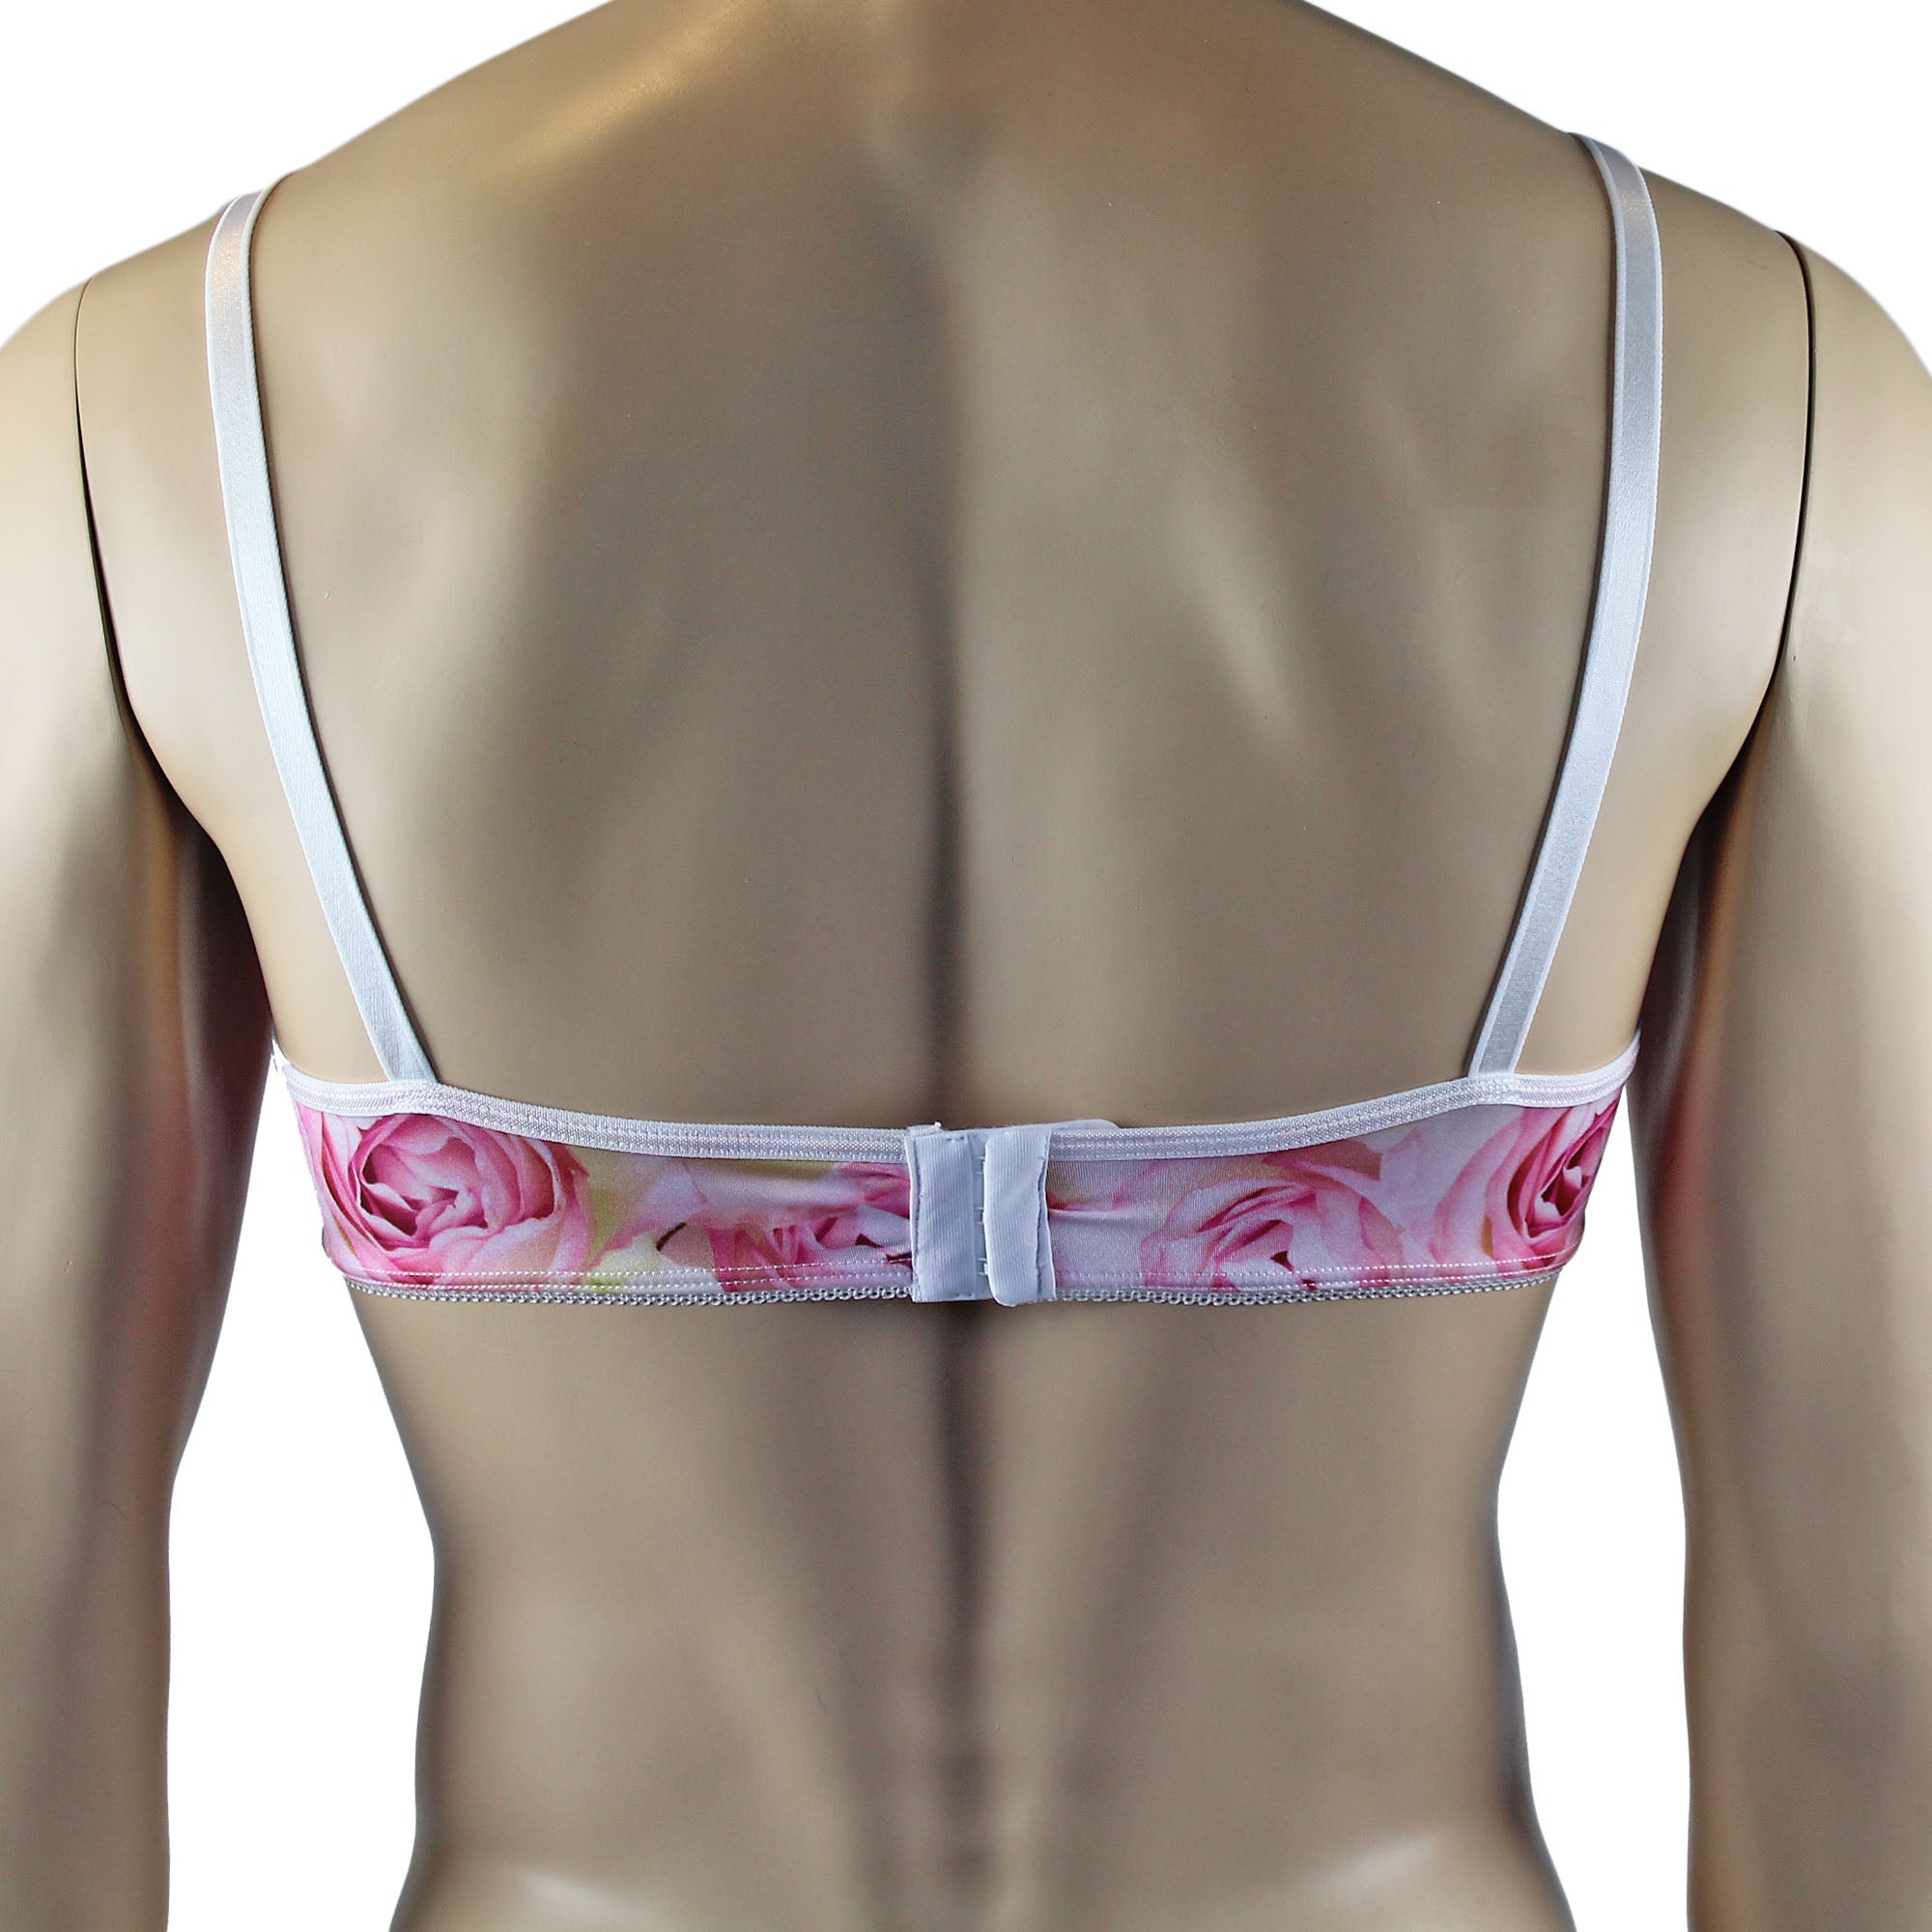 Mens Roses Spandex Bra Top with Frilled Pico Elastic Trim Male Lingerie Pink